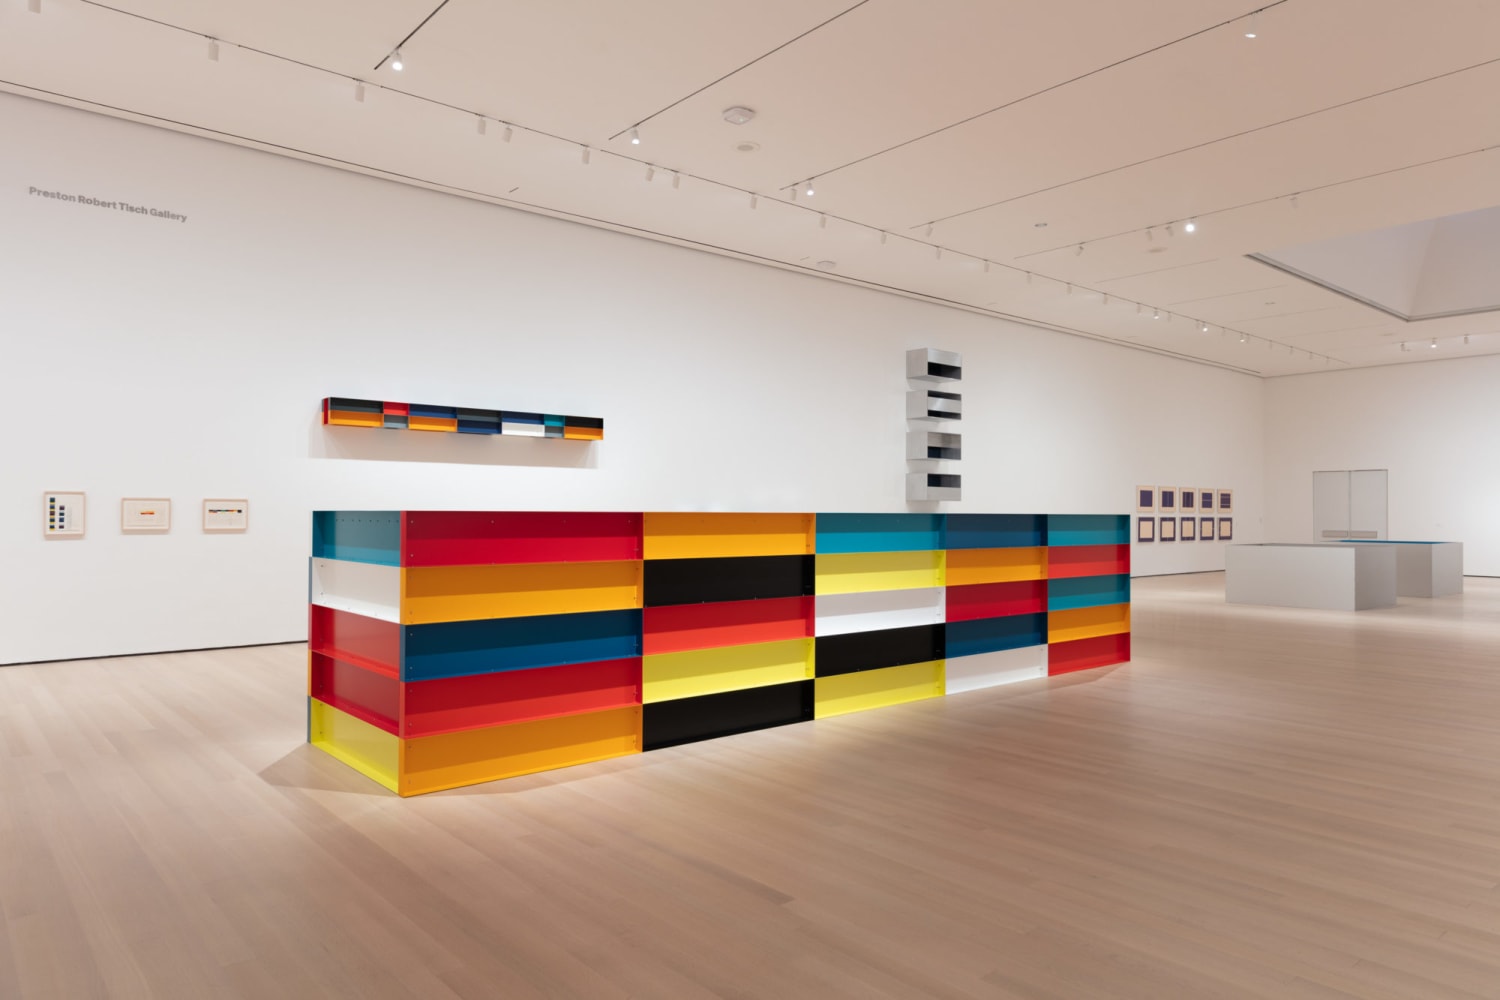 MoMA brings its exhibitions online through the Virtual Views series